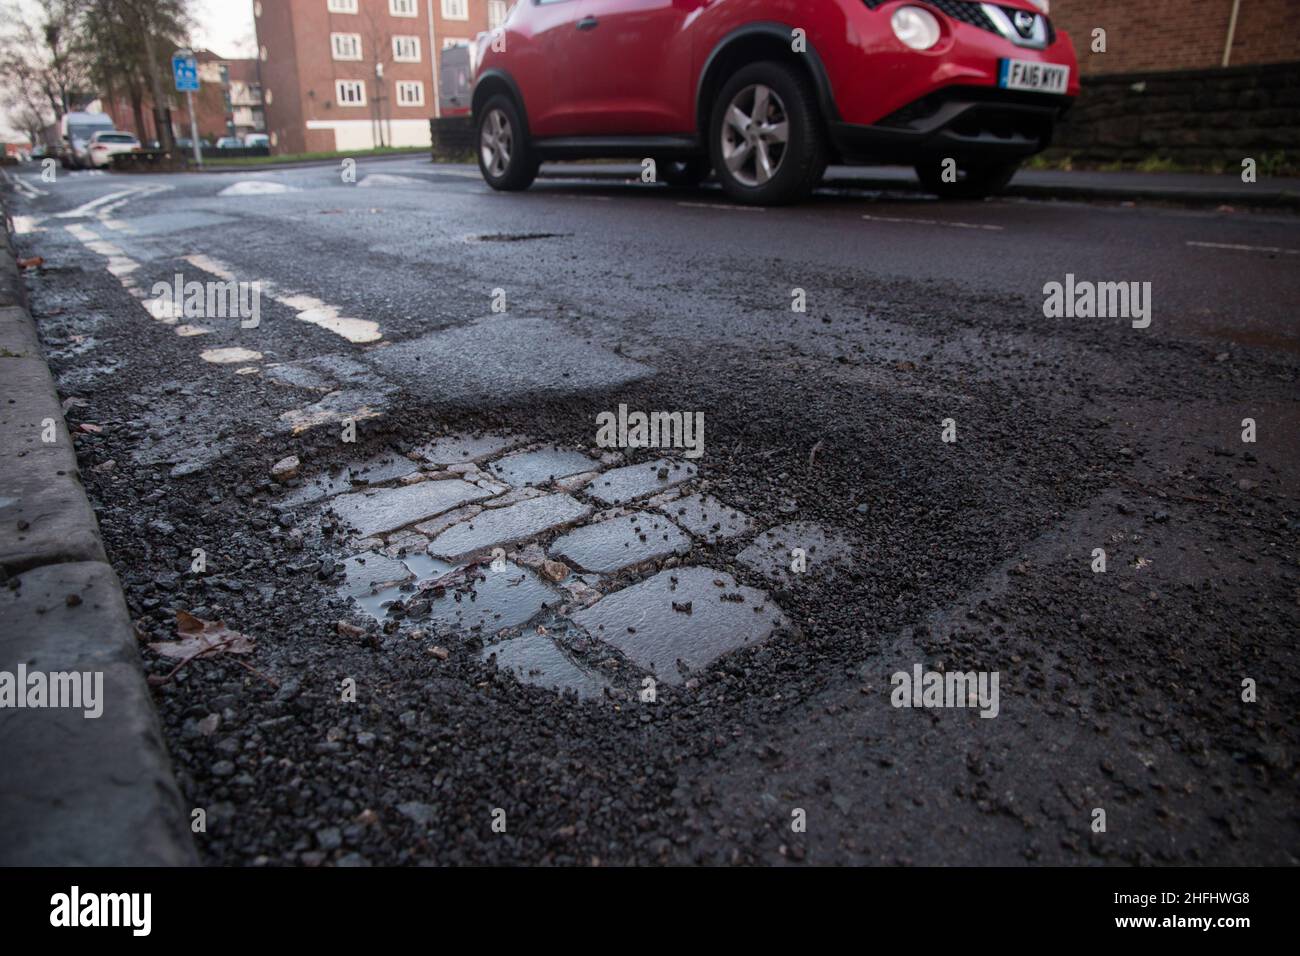 A large pothole exposing brick work in the road Stock Photo